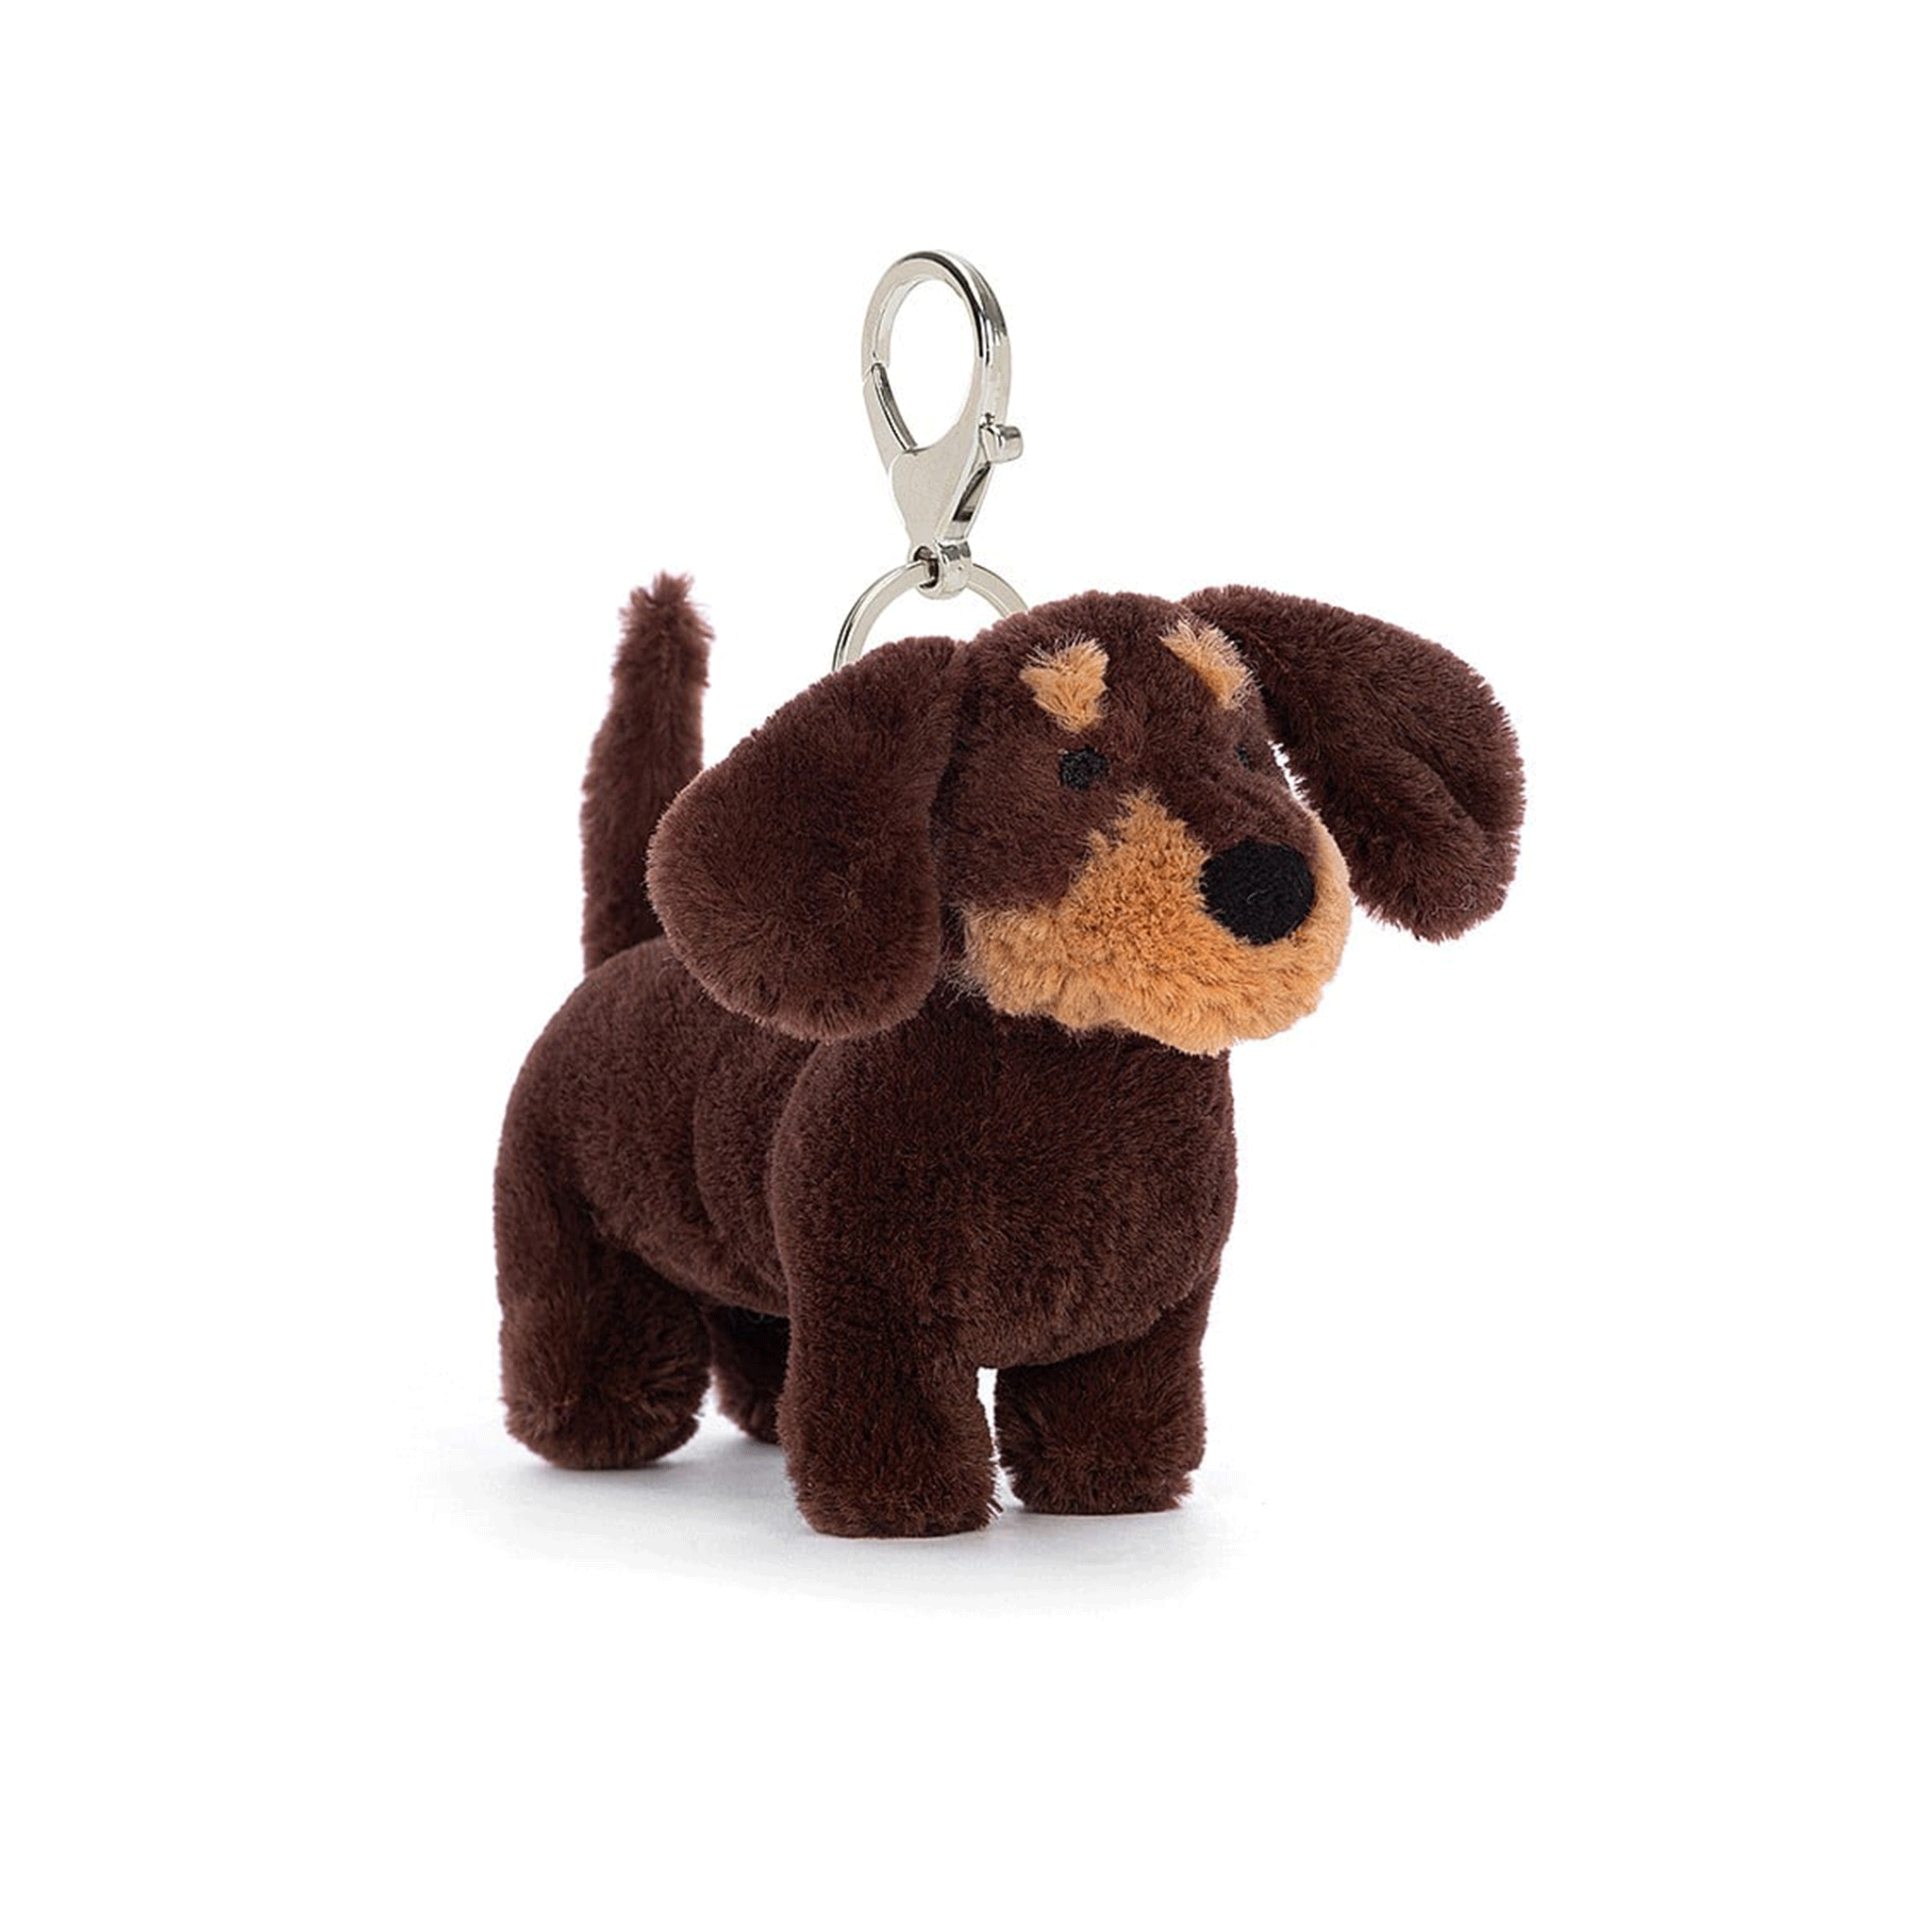 On a white background is a brown dachshund dog stuffed animal on a silver keychain loop.   